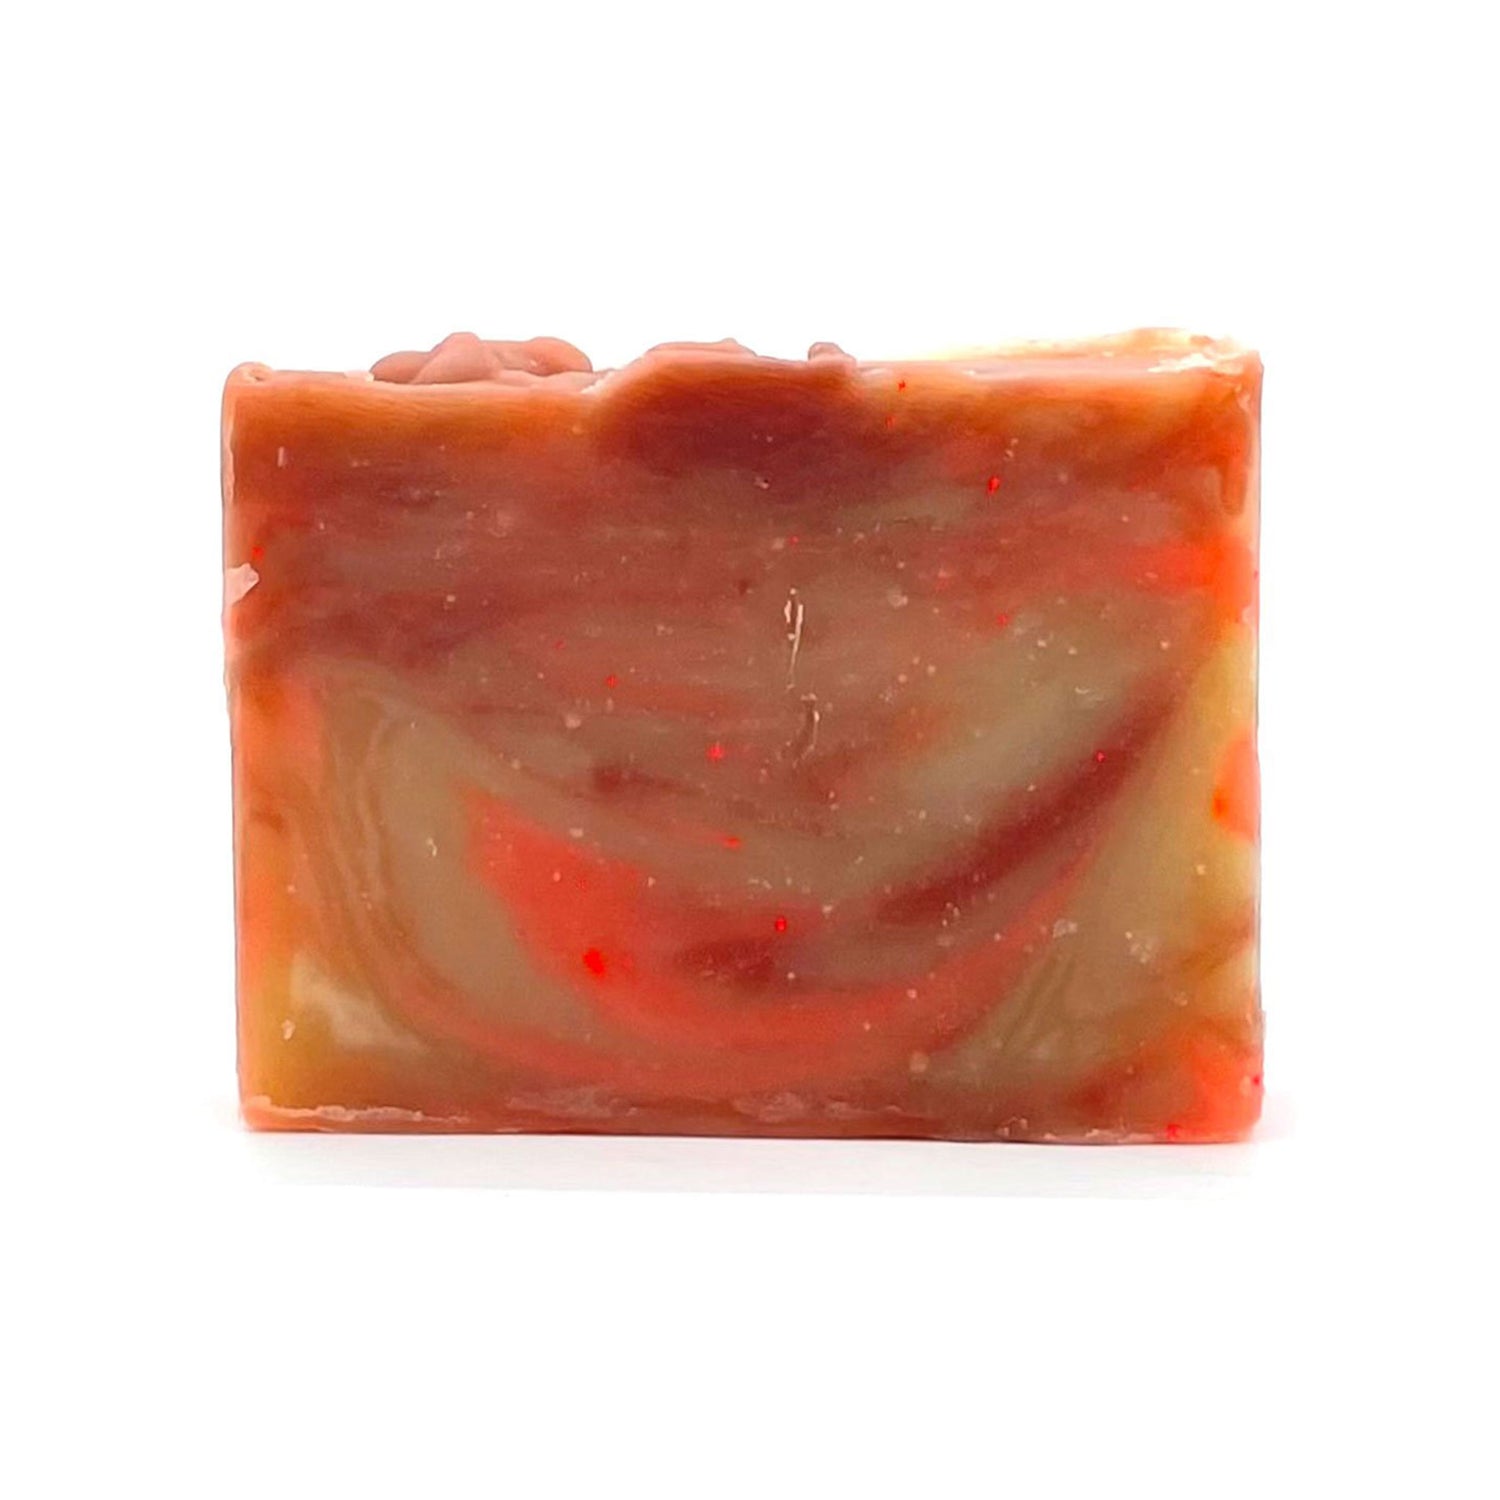 artisanal soap by JDNatlady's Creations